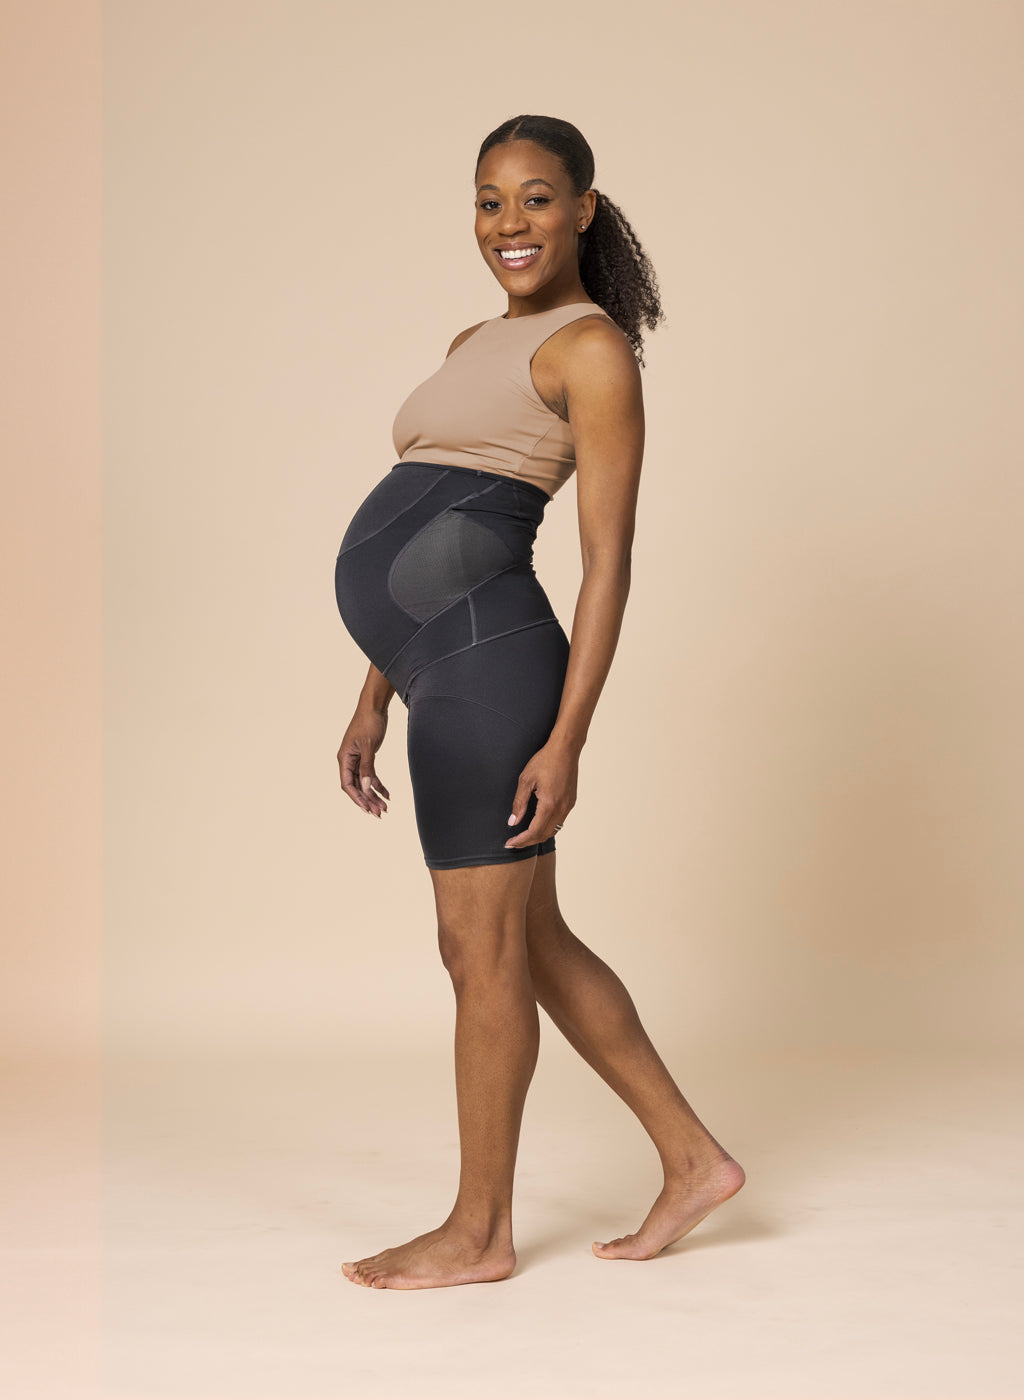 Pregnancy & Recovery Compression Shorts, Pants and Leggings Online – SRC  Health